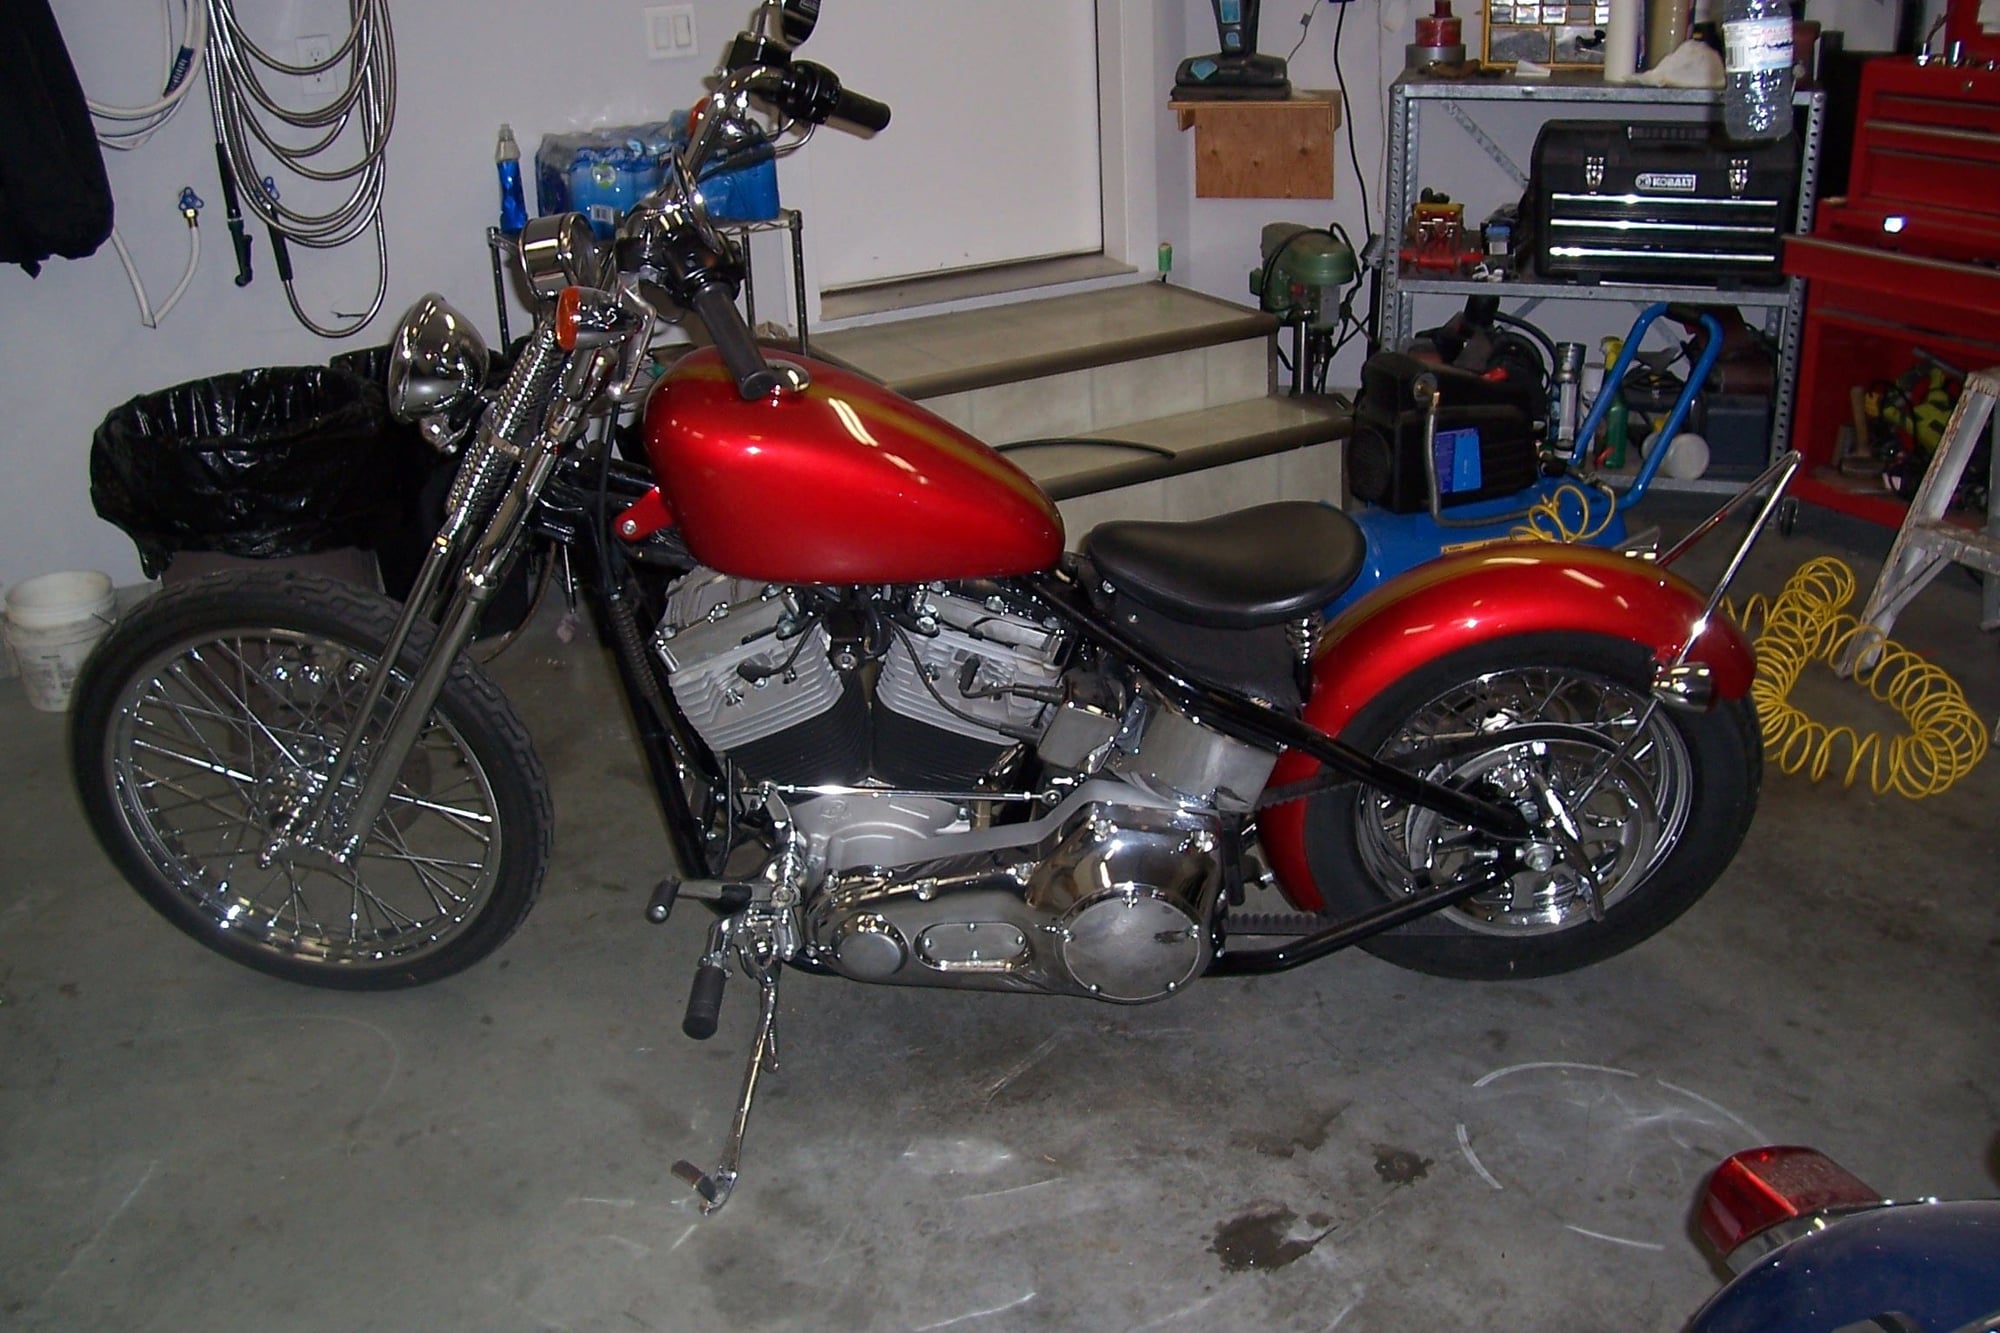 How many Harleys do you own? - Page 10 - Harley Davidson Forums